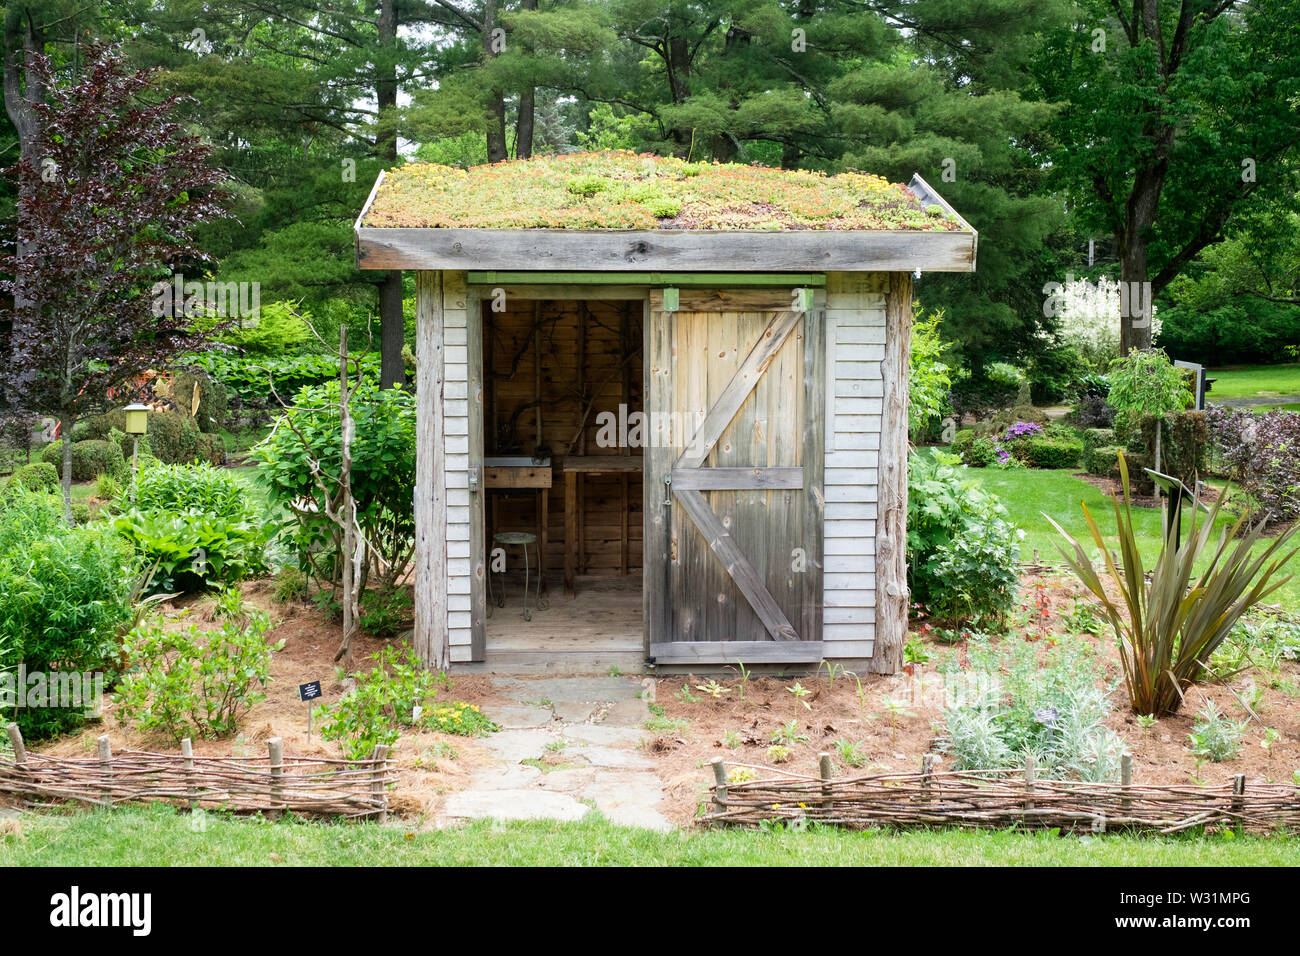 A potting shed with a living sedum roof designed by Martha Stewart at the Berkshire Botanical Garden in Stockbridge, Massachusetts, USA. Stock Photo